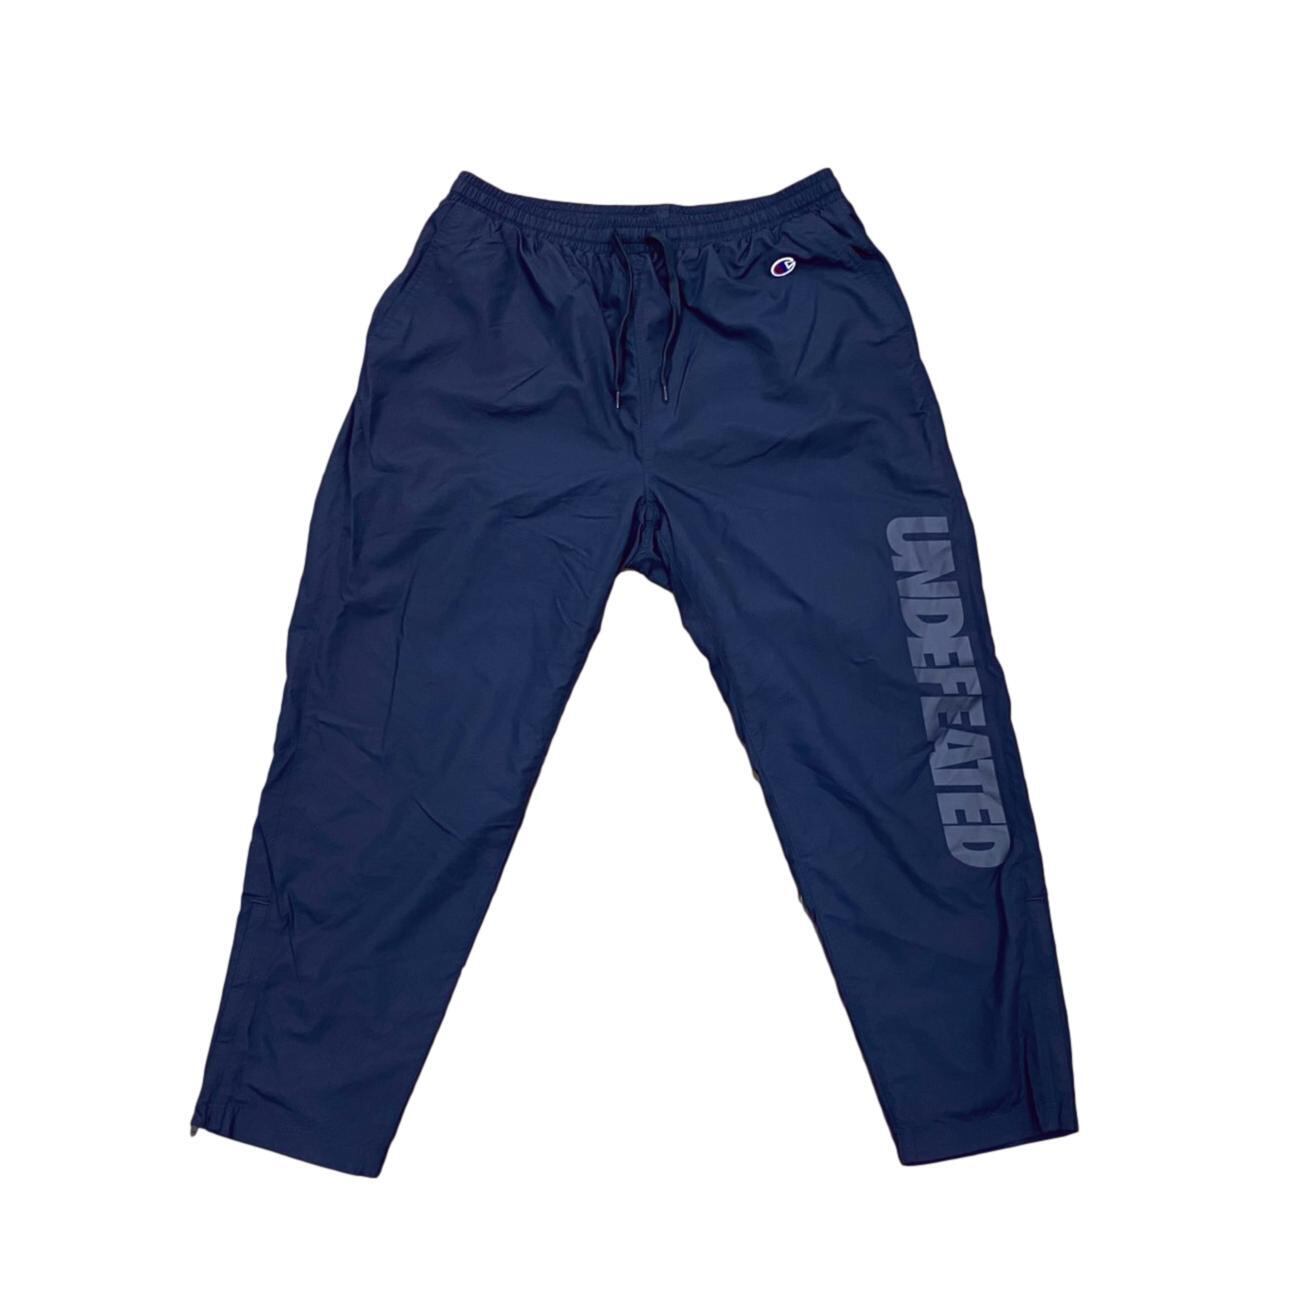 UNDEFEATED TRACK PANT M セットアップ